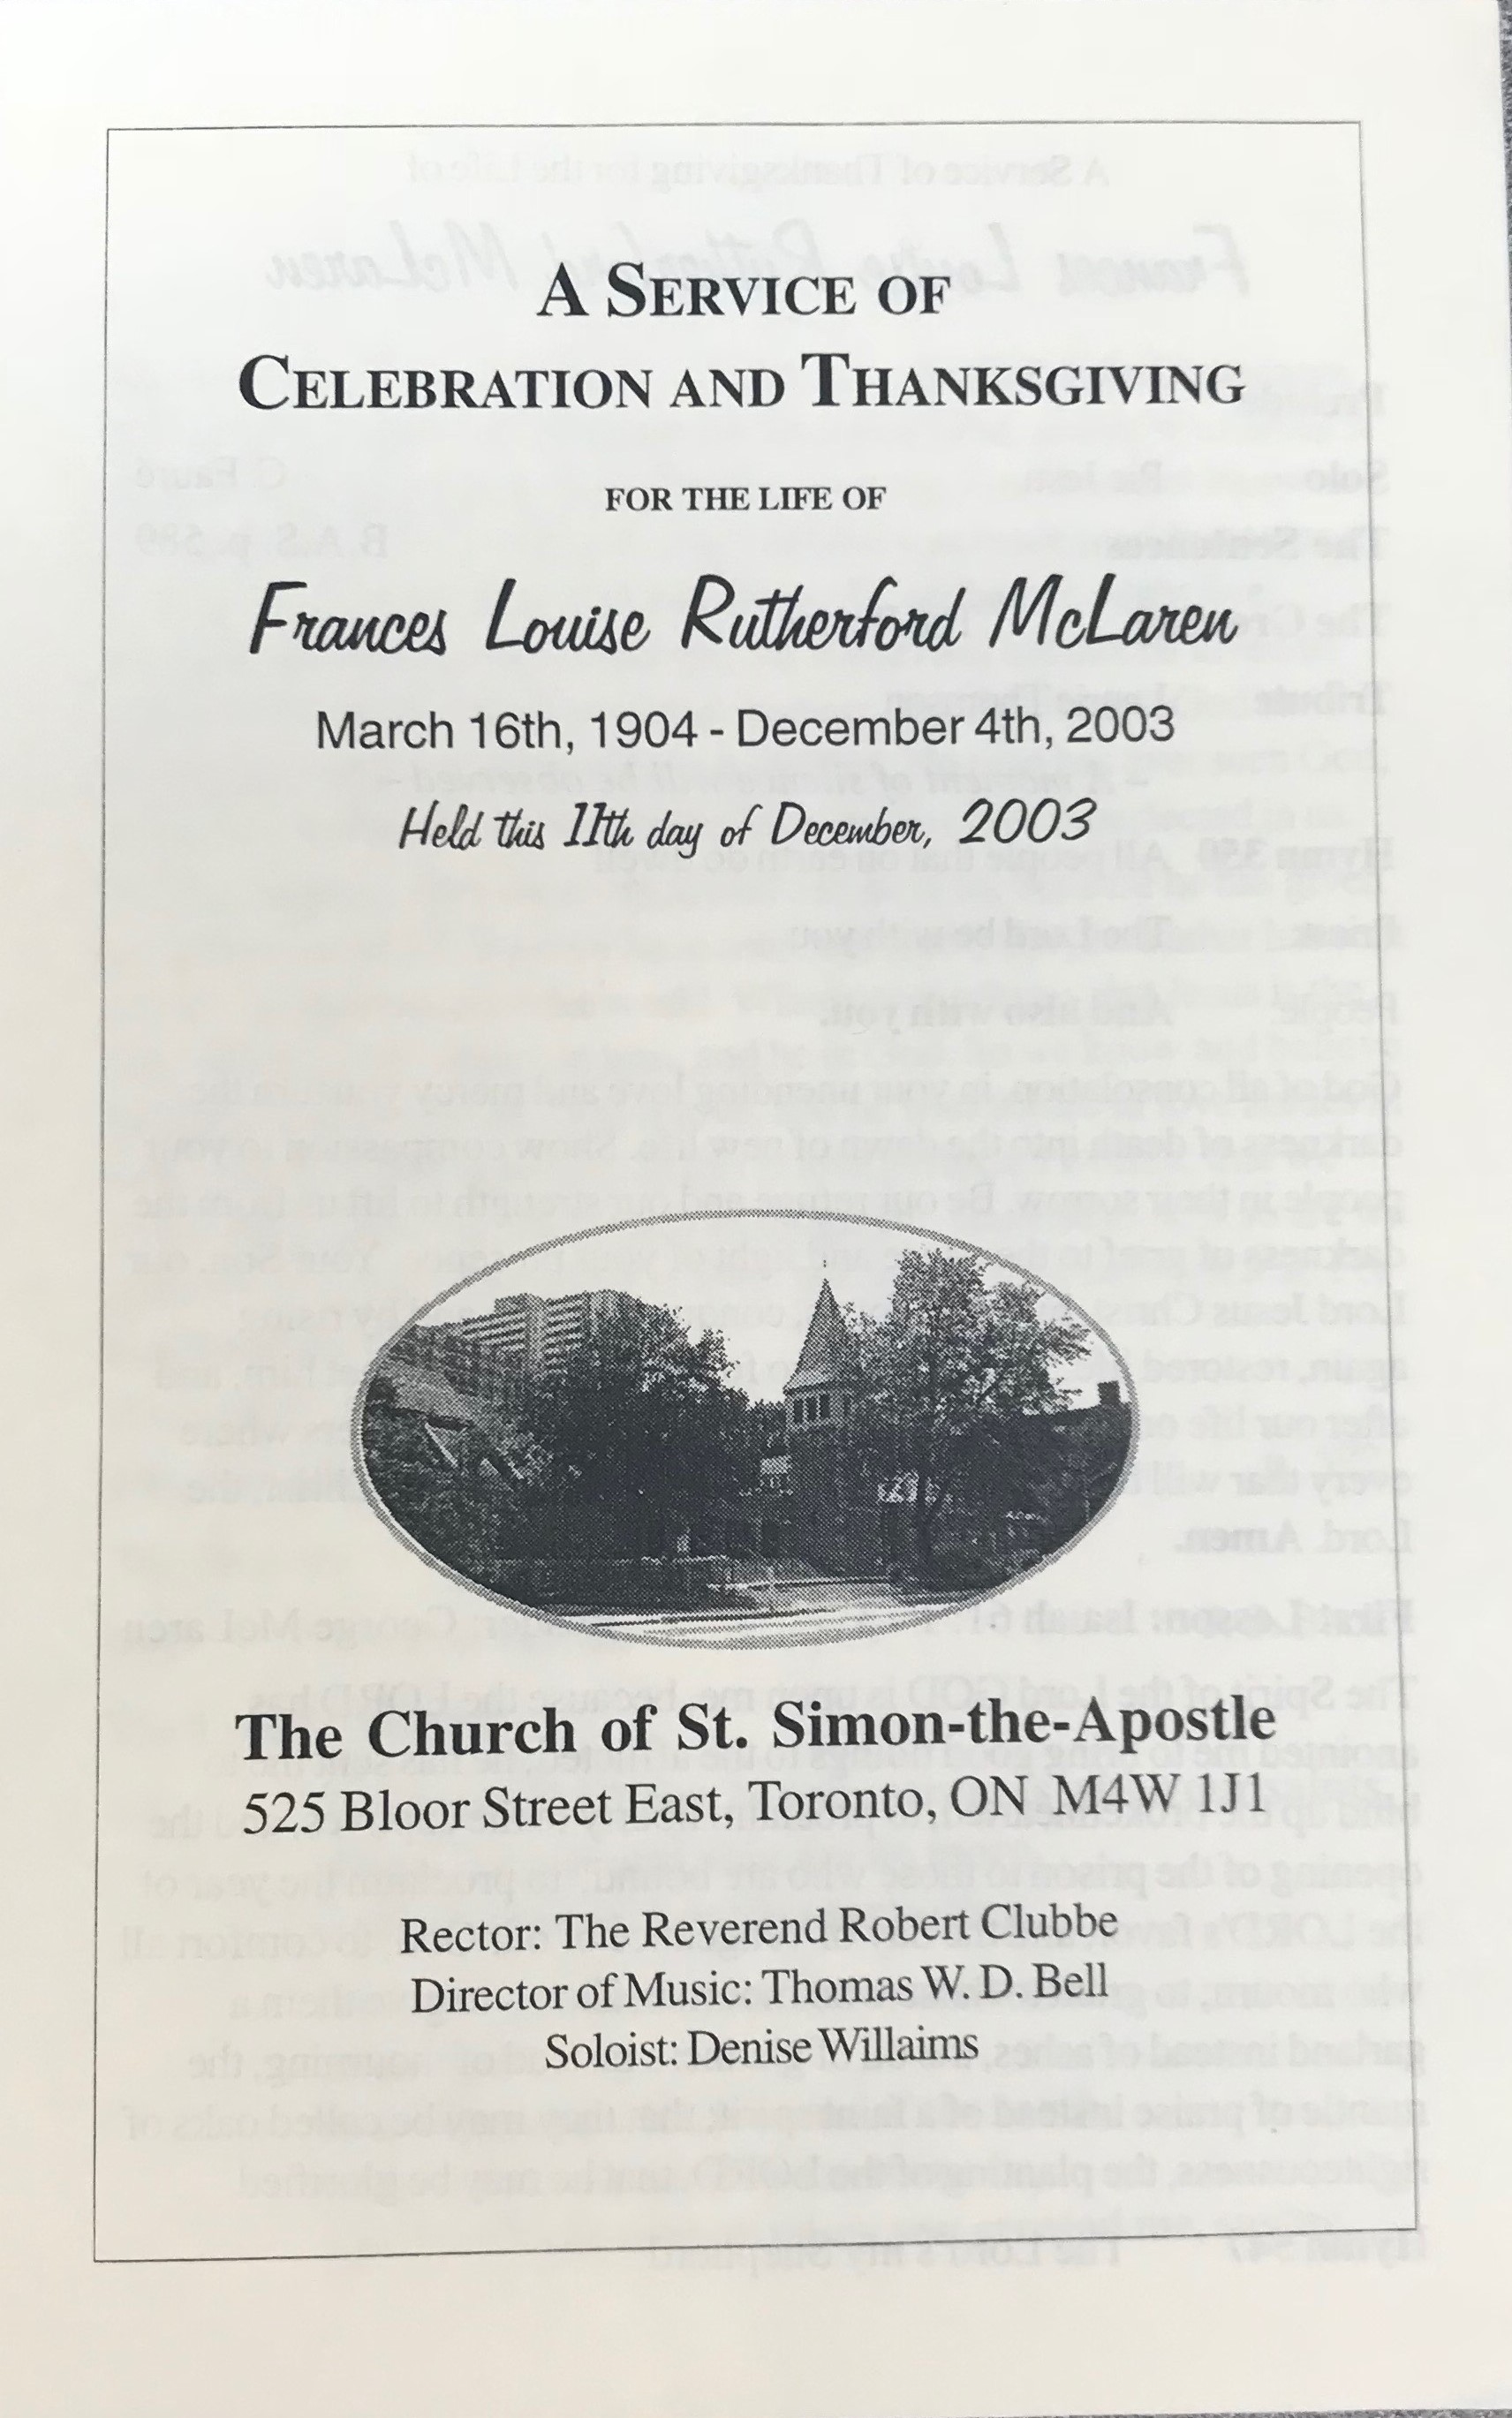 funeral service - frances louise rutherford mclaren 1904-2003.jpg